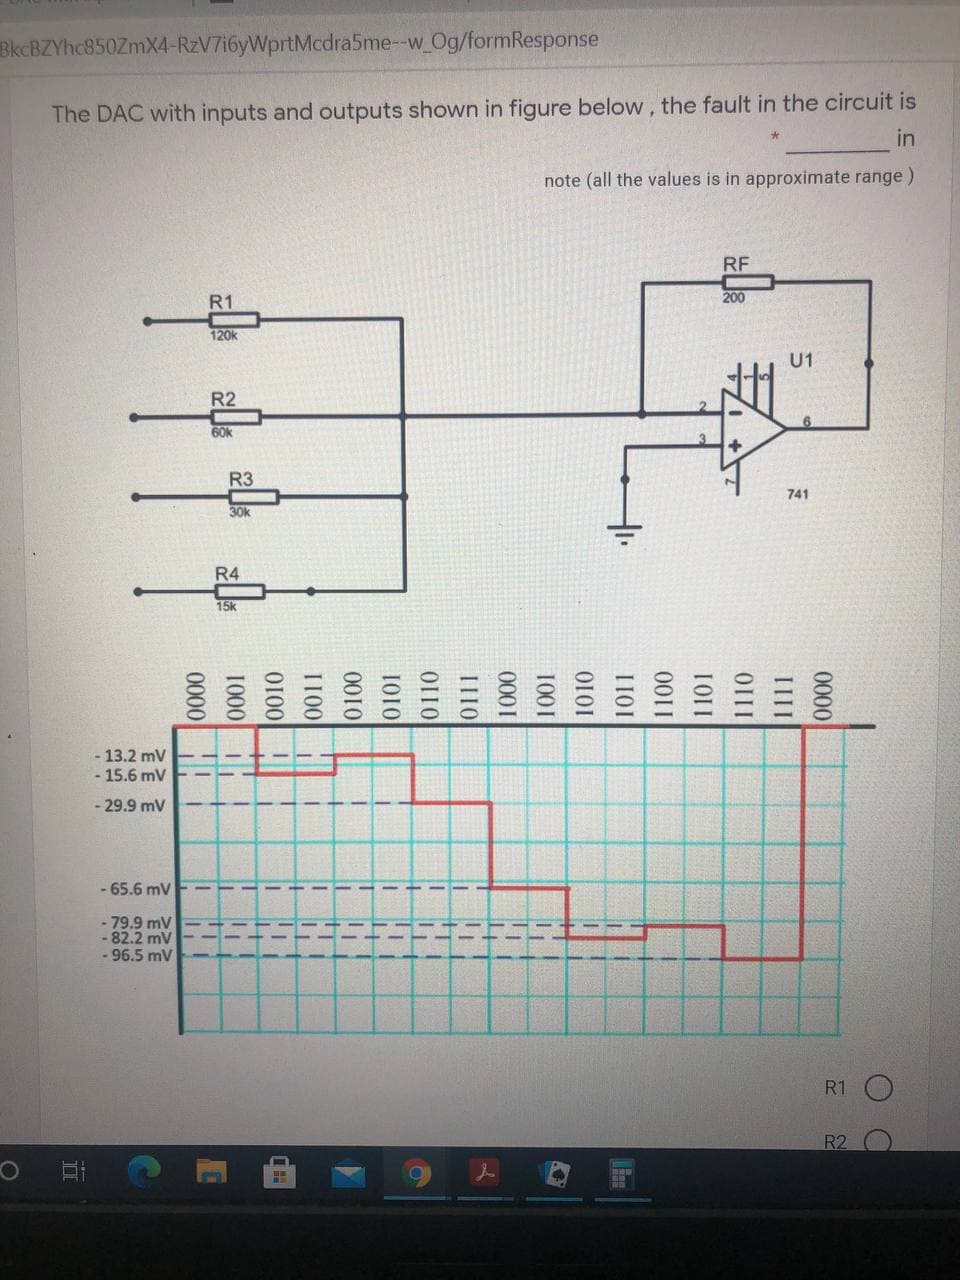 BkcBZYhc850ZmX4-RzV7i6yWprtMcdra5me-w_Og/formResponse
The DAC with inputs and outputs shown in figure below, the fault in the circuit is
in
note (all the values is in approximate range )
RF
R1
200
120k
U1
R2
60k
R3
741
30k
R4
15k
- 13.2 mV
- 15.6 mV
- 29.9 mV
-65.6 mV
-79.9 mV
- 82.2 mV
- 96.5 mV
R1 O
R2
0000
0010
0100
0110
000
1001
1010
1011
1101
1110
III
0000
